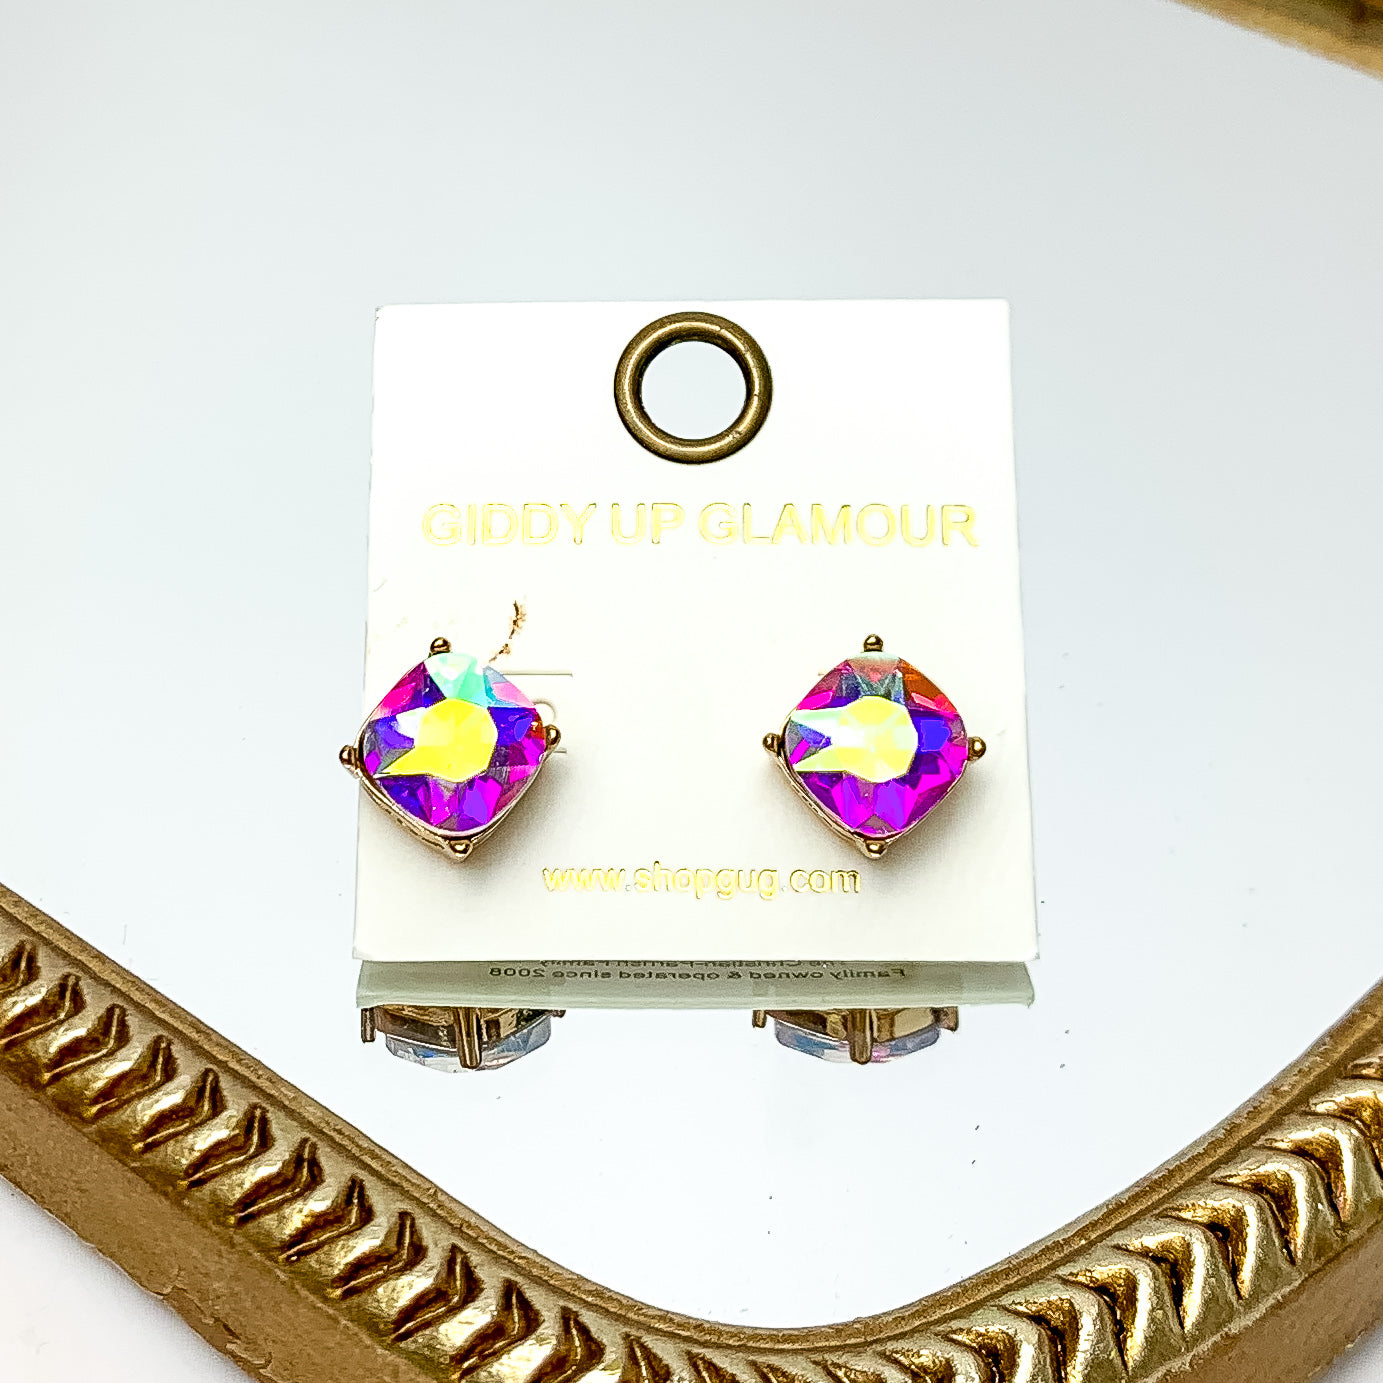 Large AB Crystal Stud Earrings in Gold Tone. These earrings are pictured laying on a gold trimmed mirror.